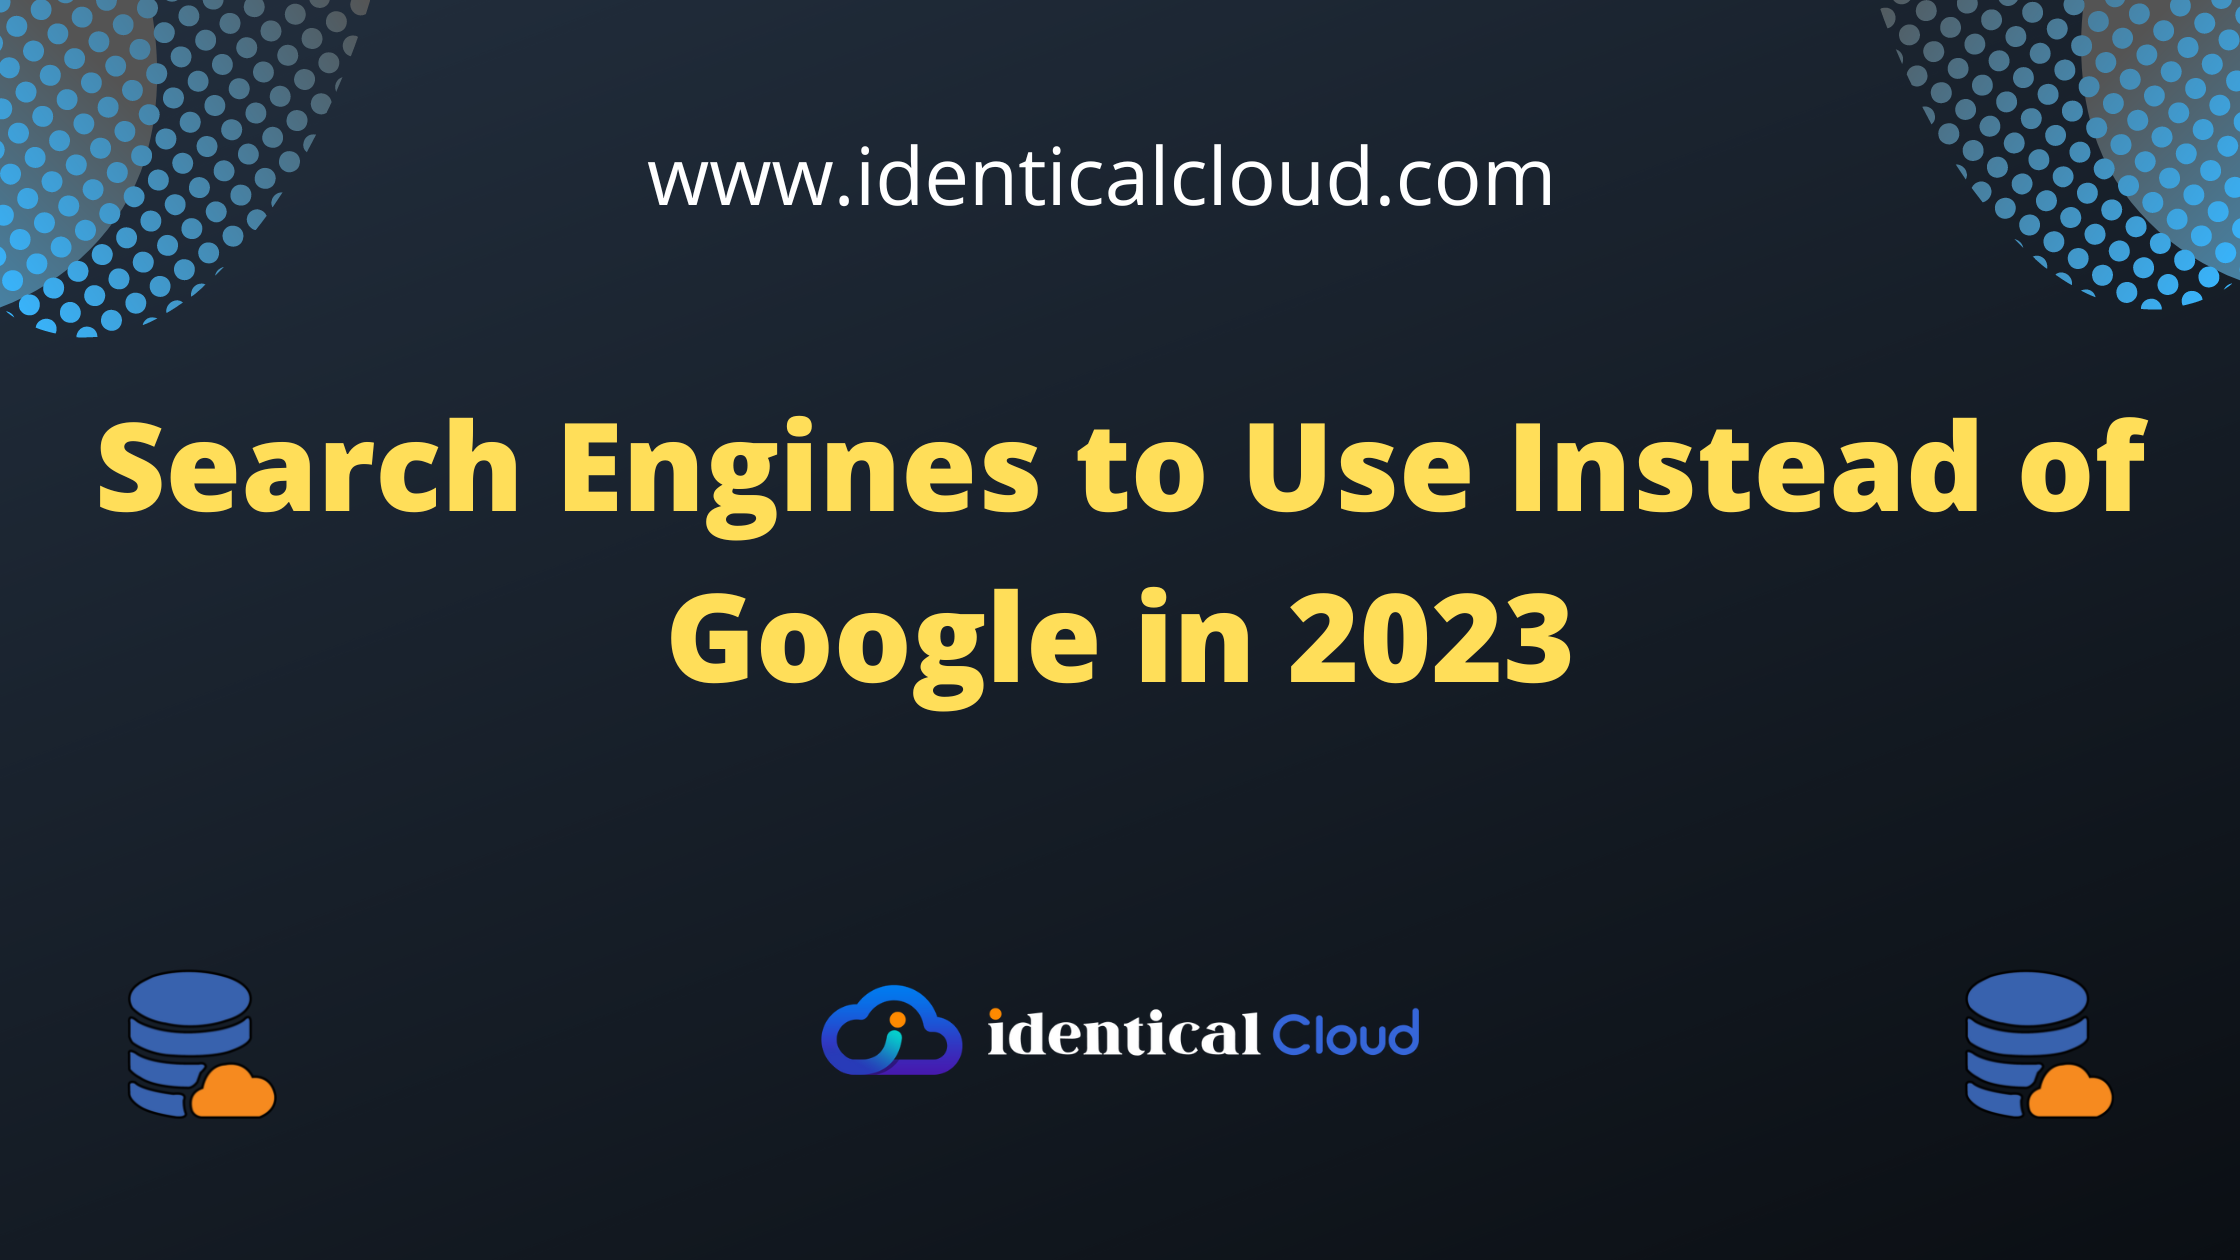 Search Engines to Use Instead of Google in 2023 - identicalcloud.com